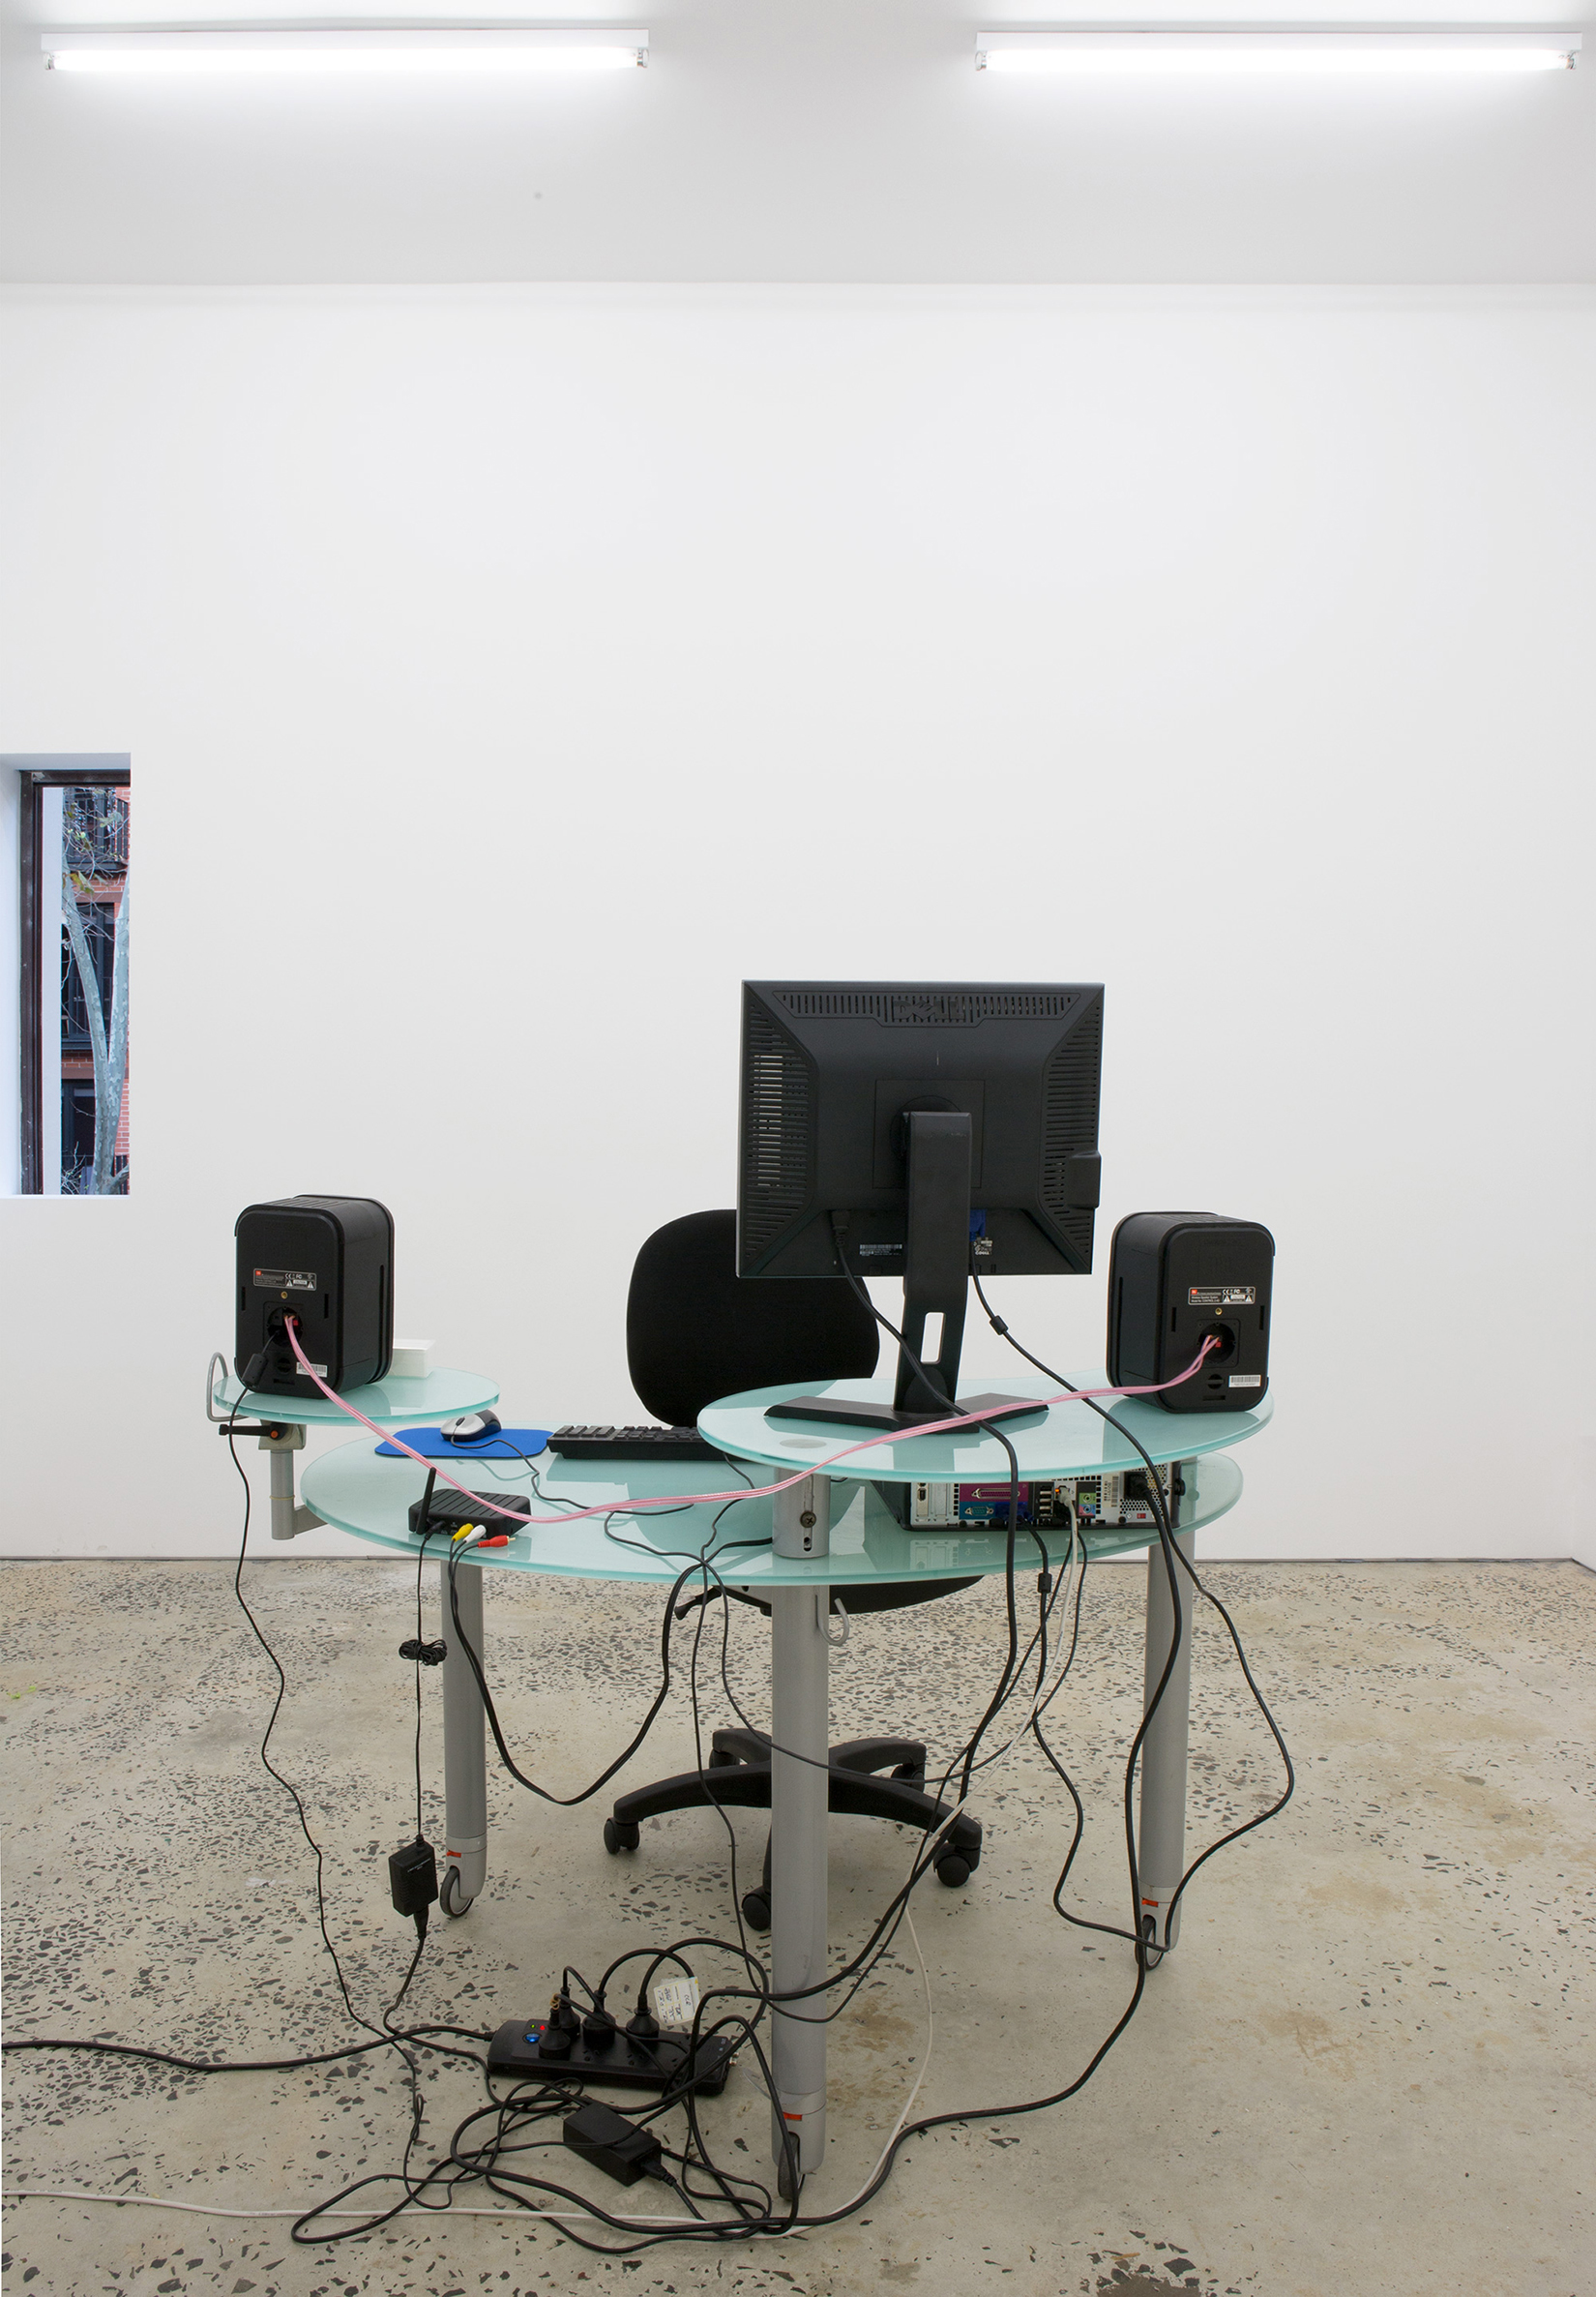 "Potpourri", 2014, video stream, Dell desktop computer, office chair, 3 tiered frosted glass computer desk, speakers, business cards